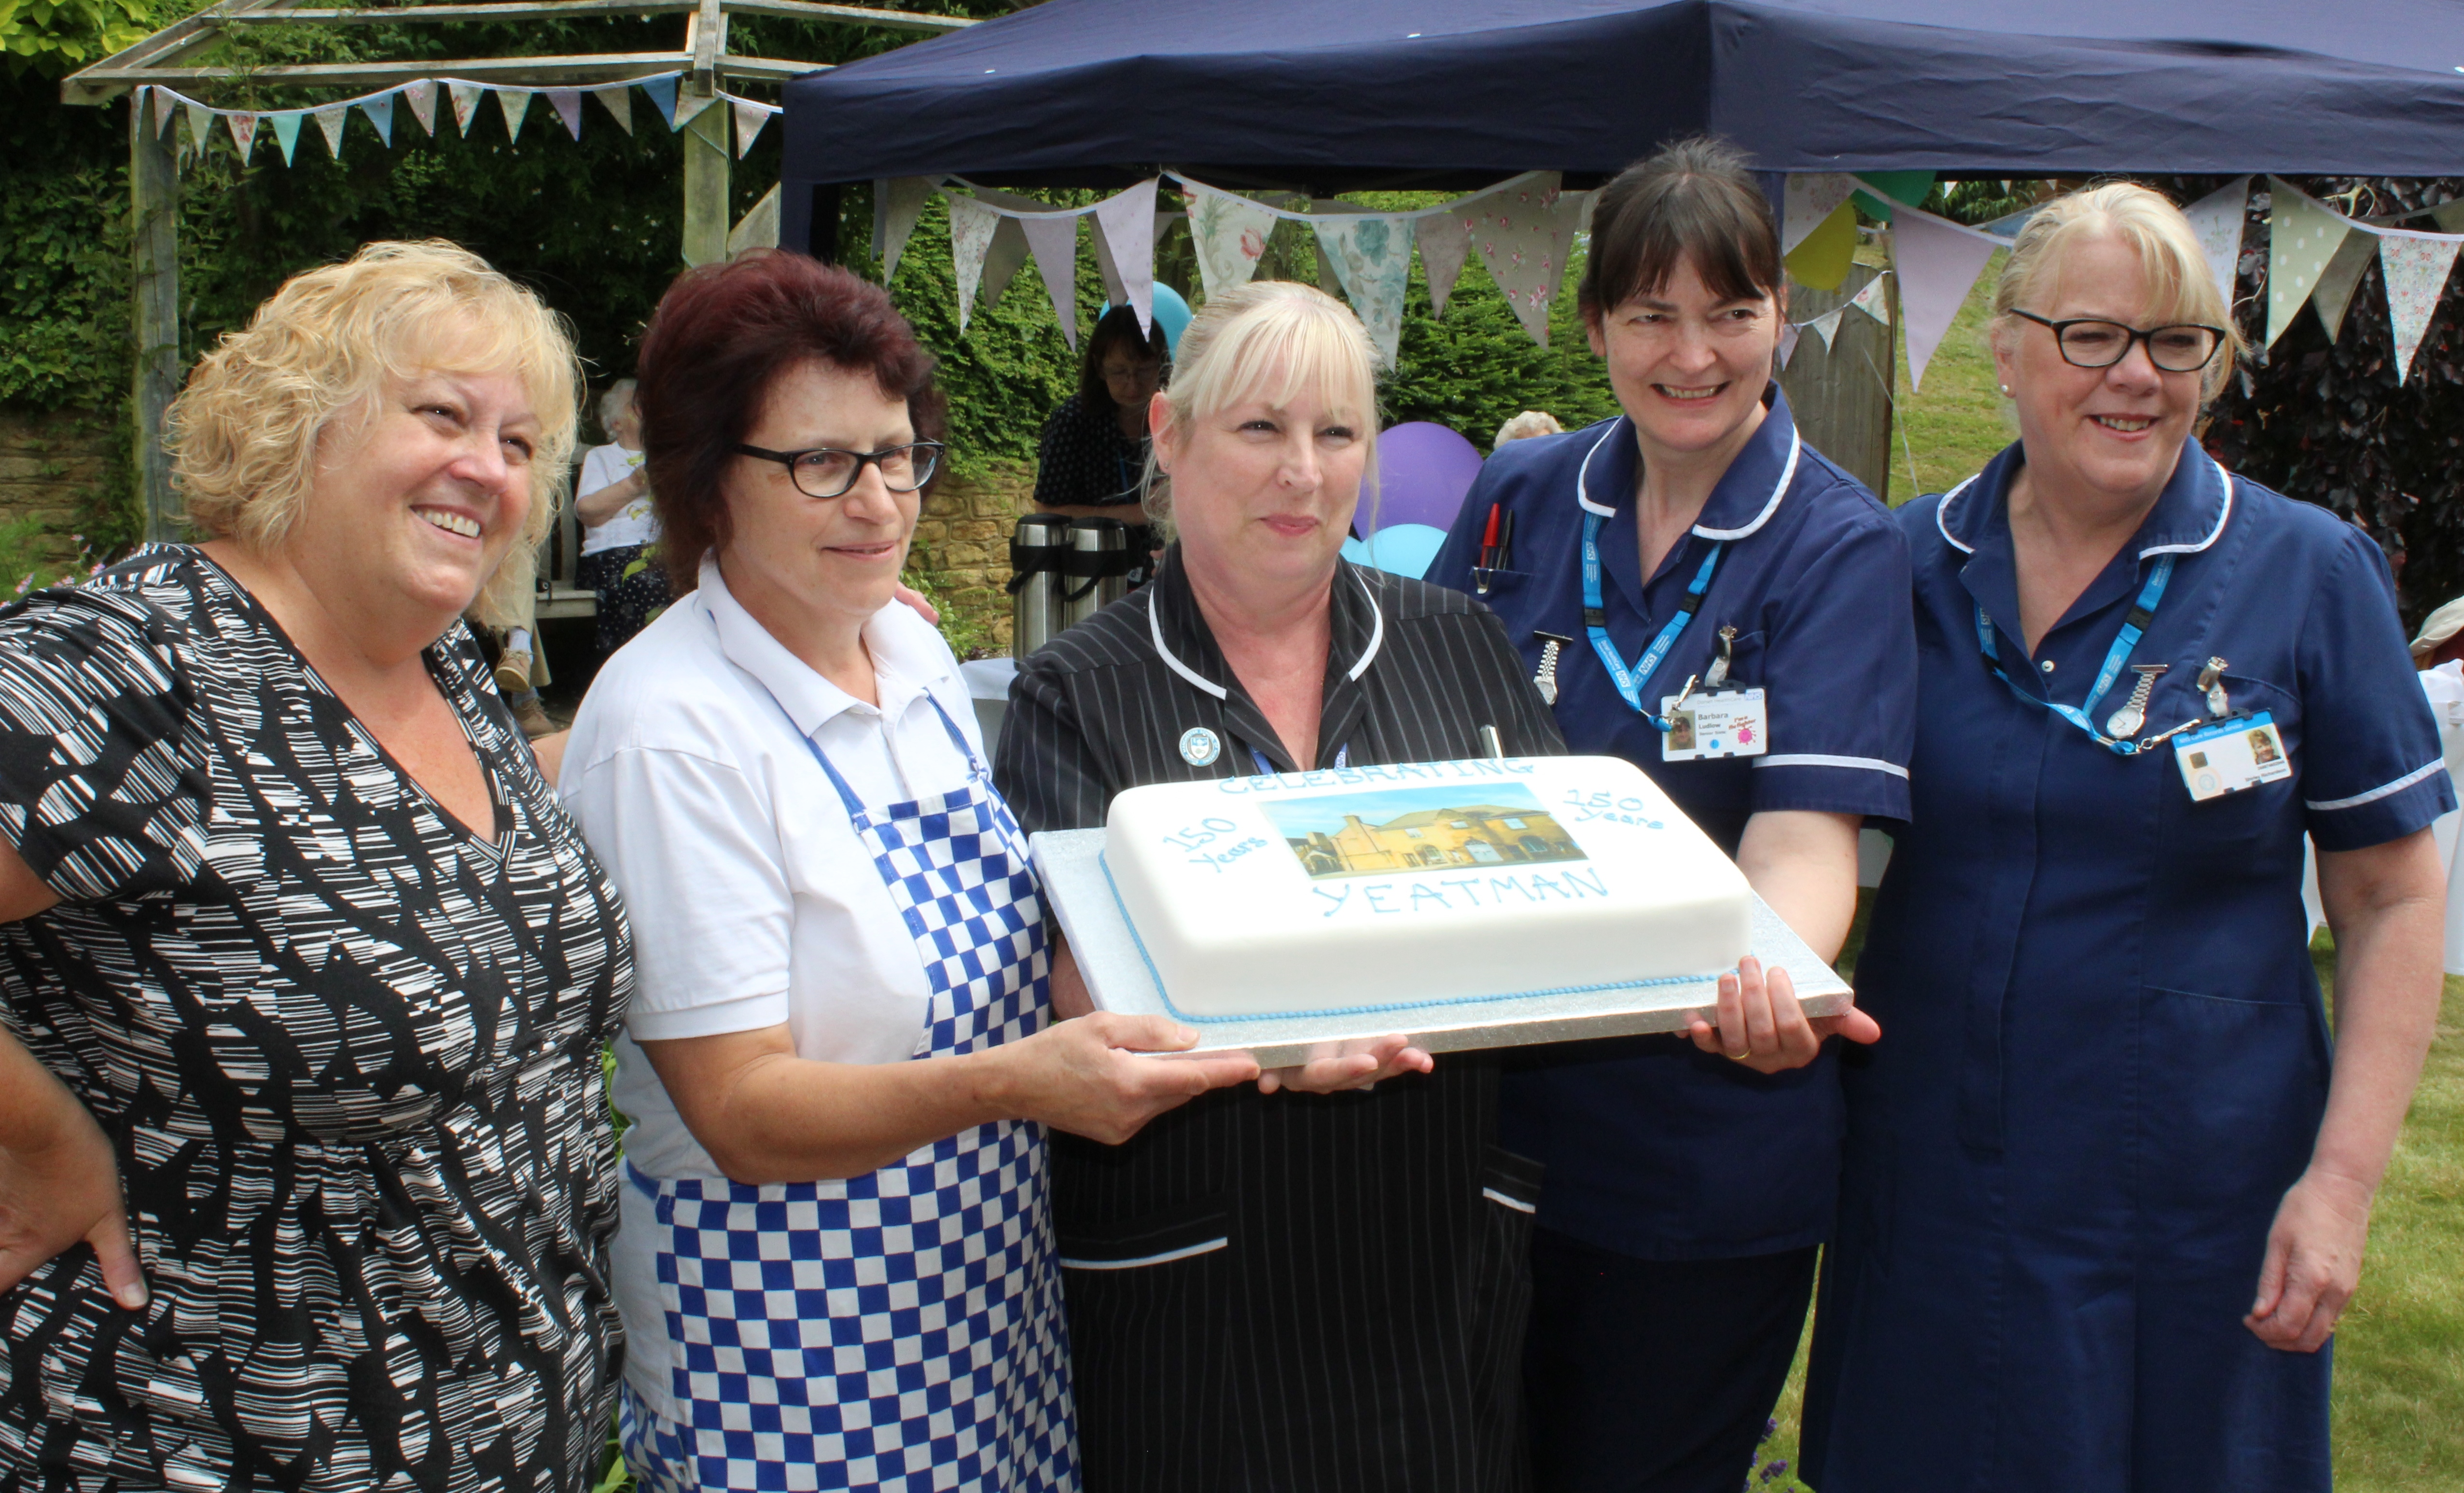 Over a hundred turn out to mark Yeatman Hospital's historic milestone